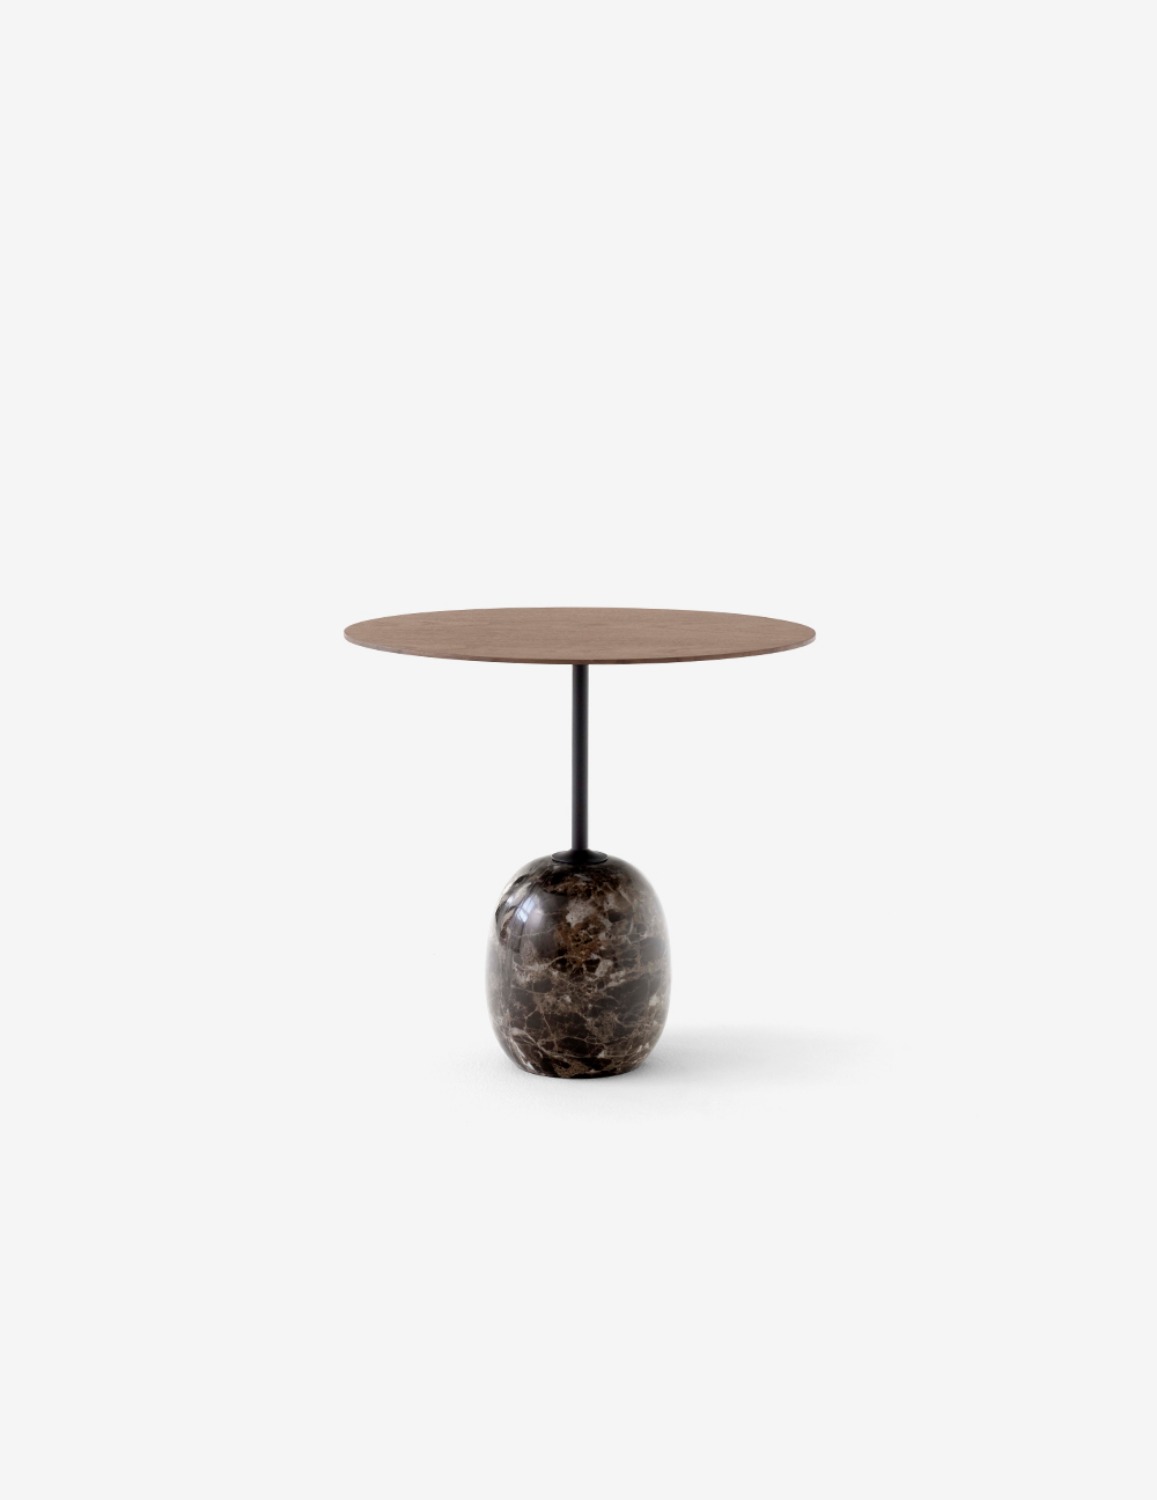 [&amp;Tradition] Lato side table / LN9 (Walnut-Oval)